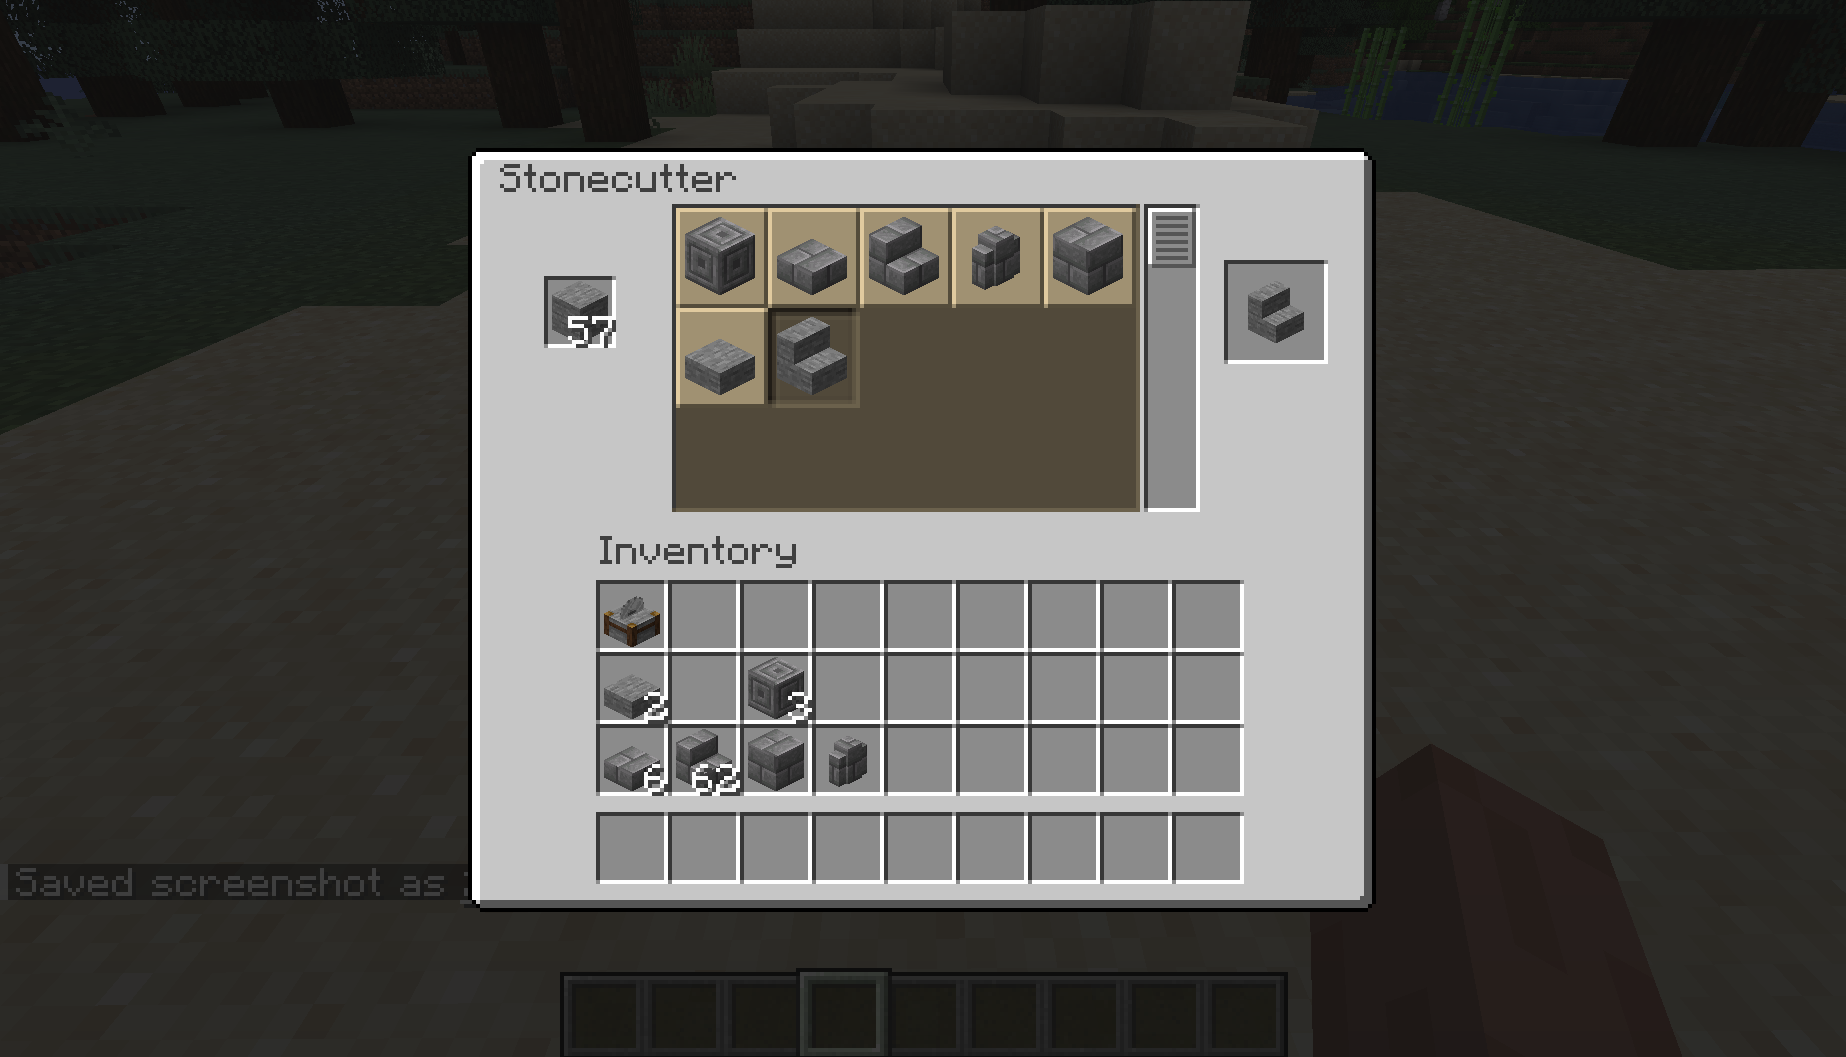 Display of the GUI using Minecraft GUI Size of 4 (Minecraft Default)